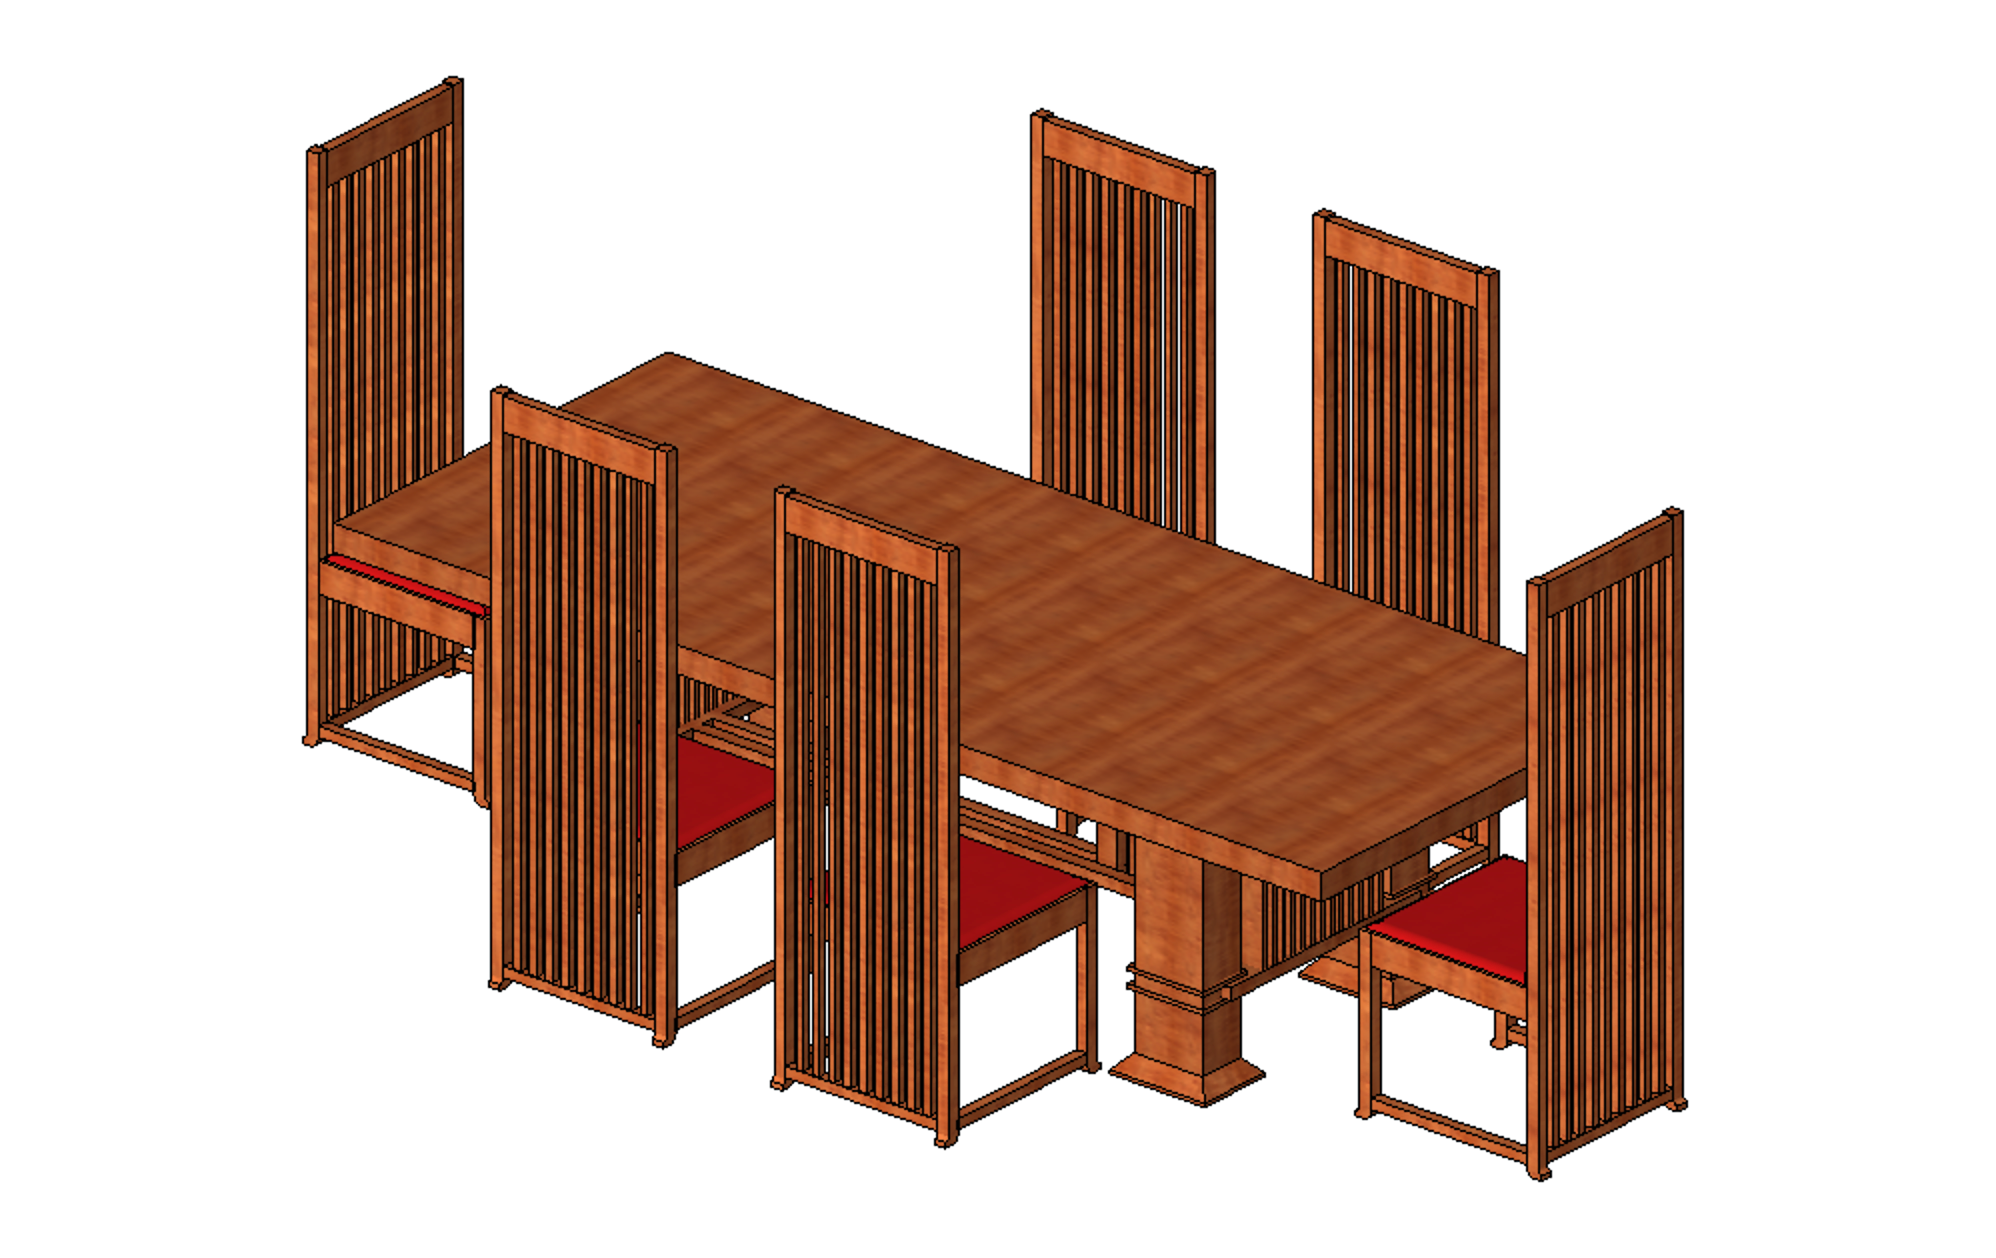 Chairs and a table can be nested into the same Revit family. Setting them as Shared allows us to tag and schedule them in the project.